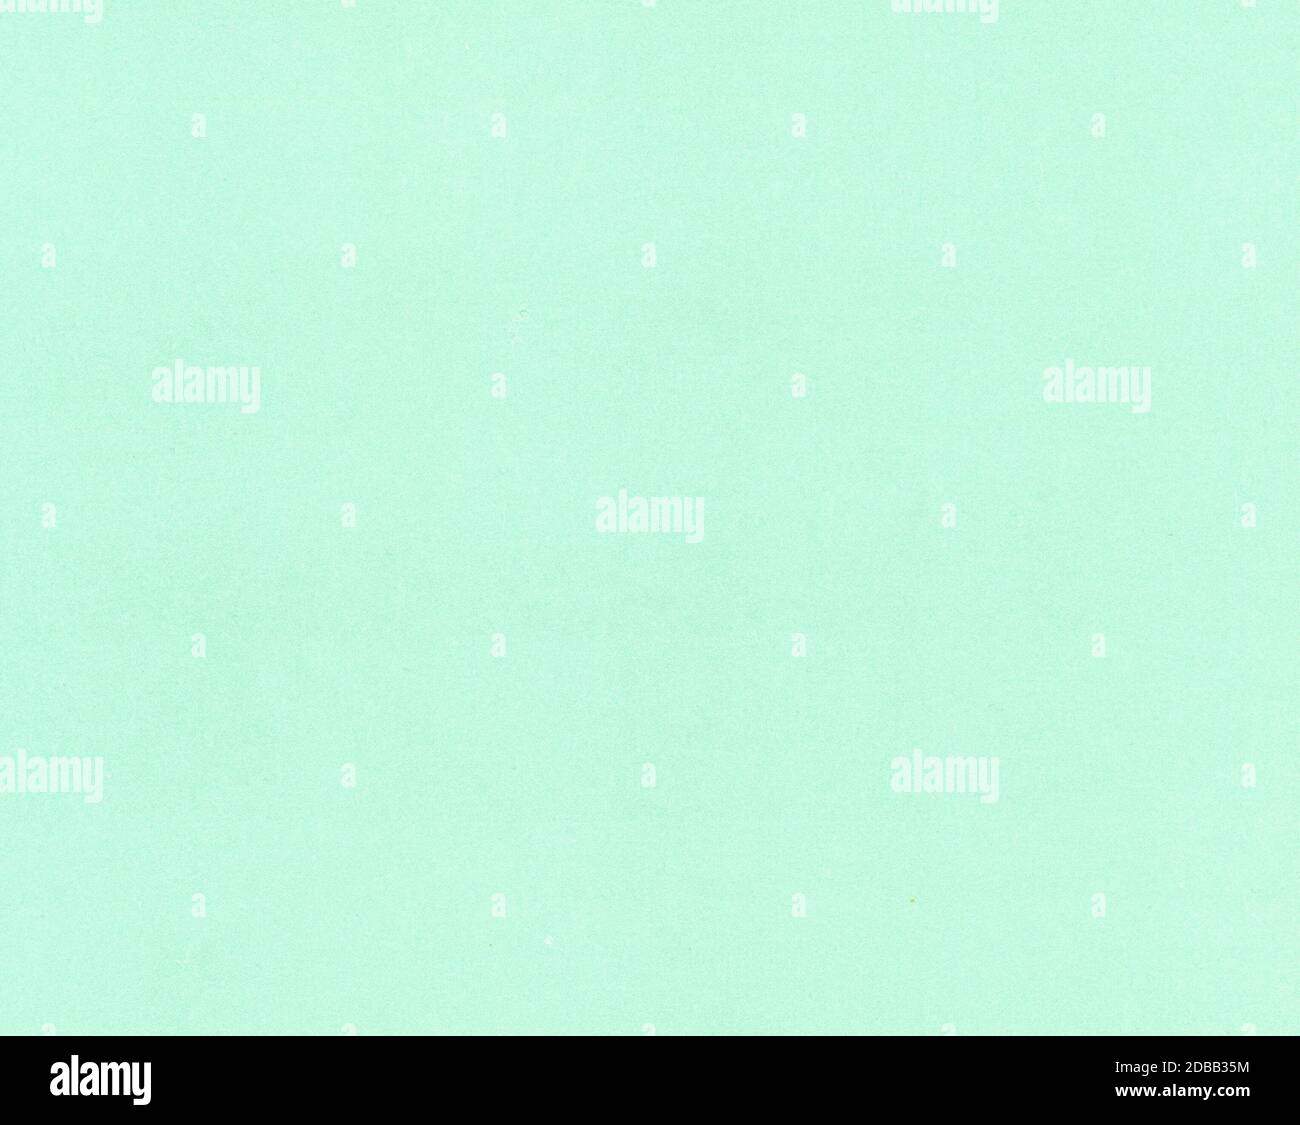 light green paper texture useful as a background Stock Photo - Alamy